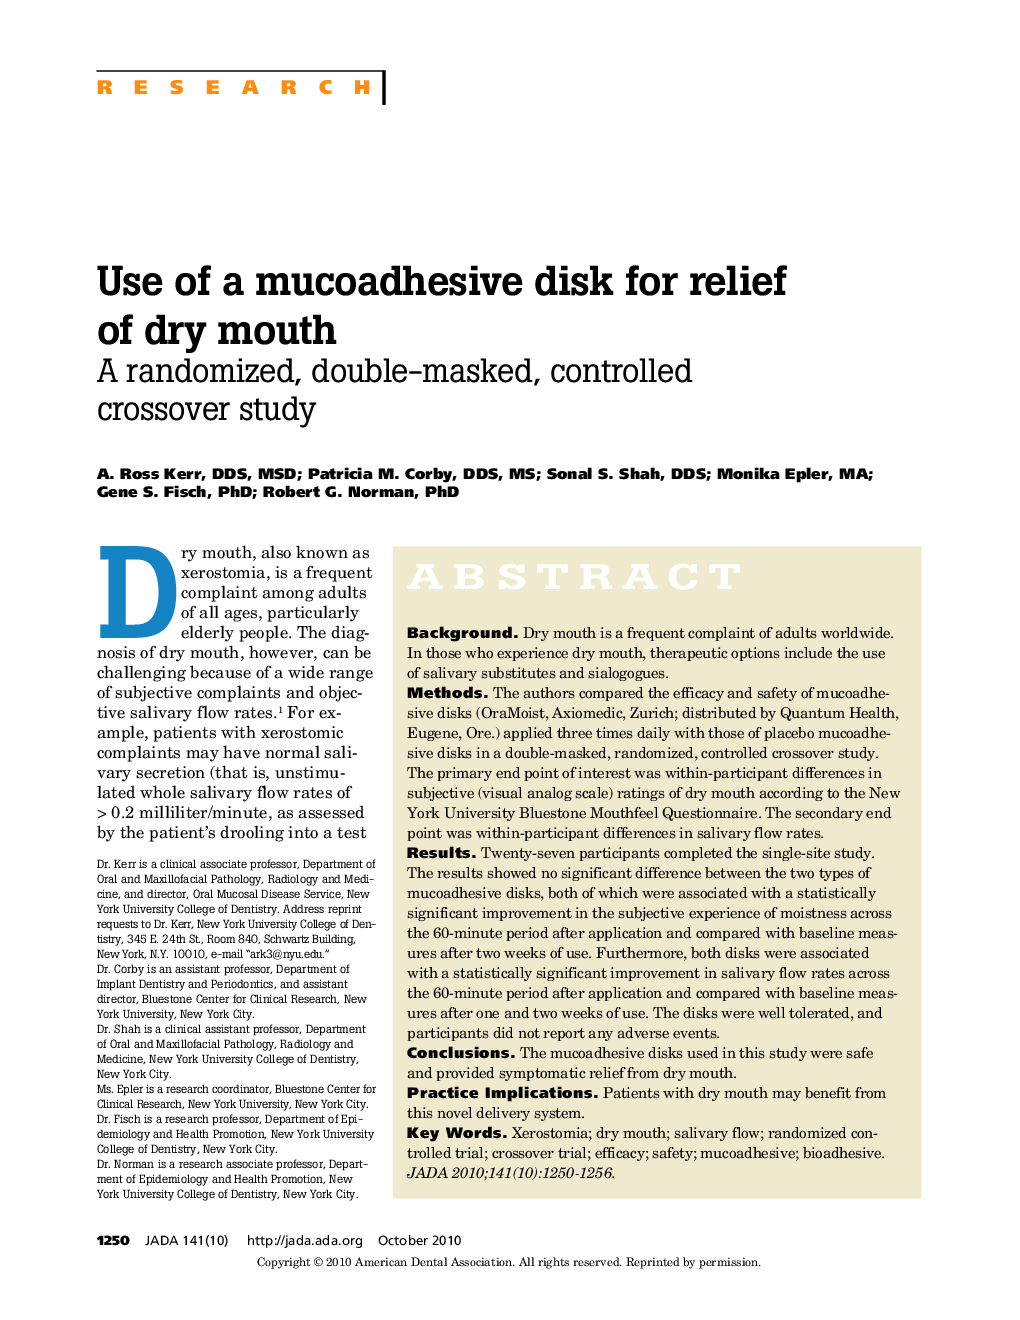 Use of a Mucoadhesive Disk for Relief of Dry Mouth